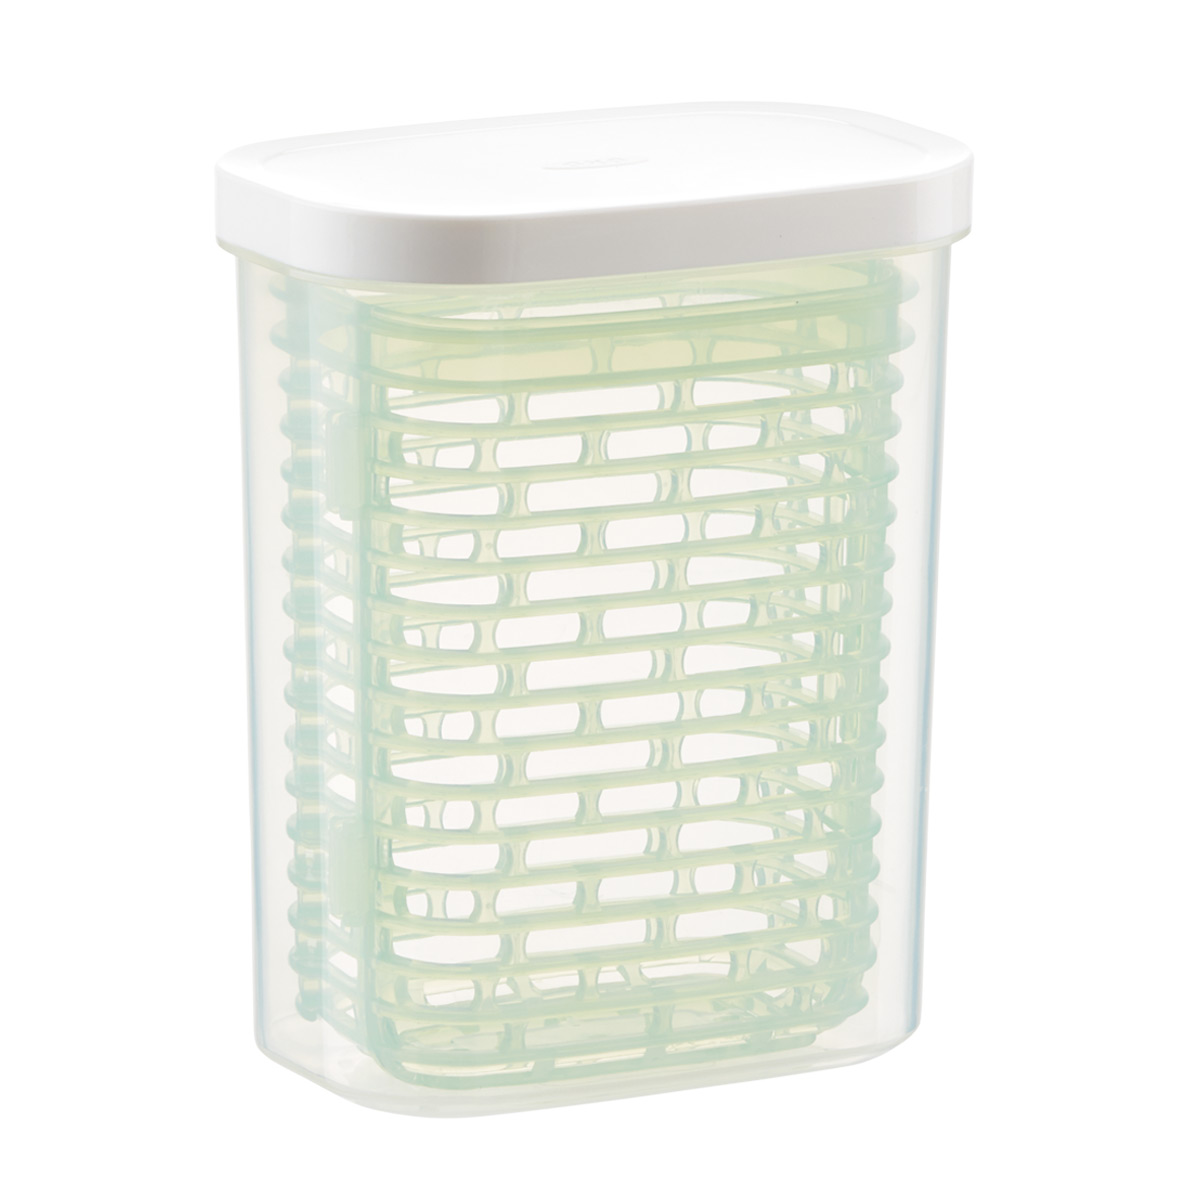 https://www.containerstore.com/catalogimages/330070/10073564-greensaver-herbkeeper-small.jpg